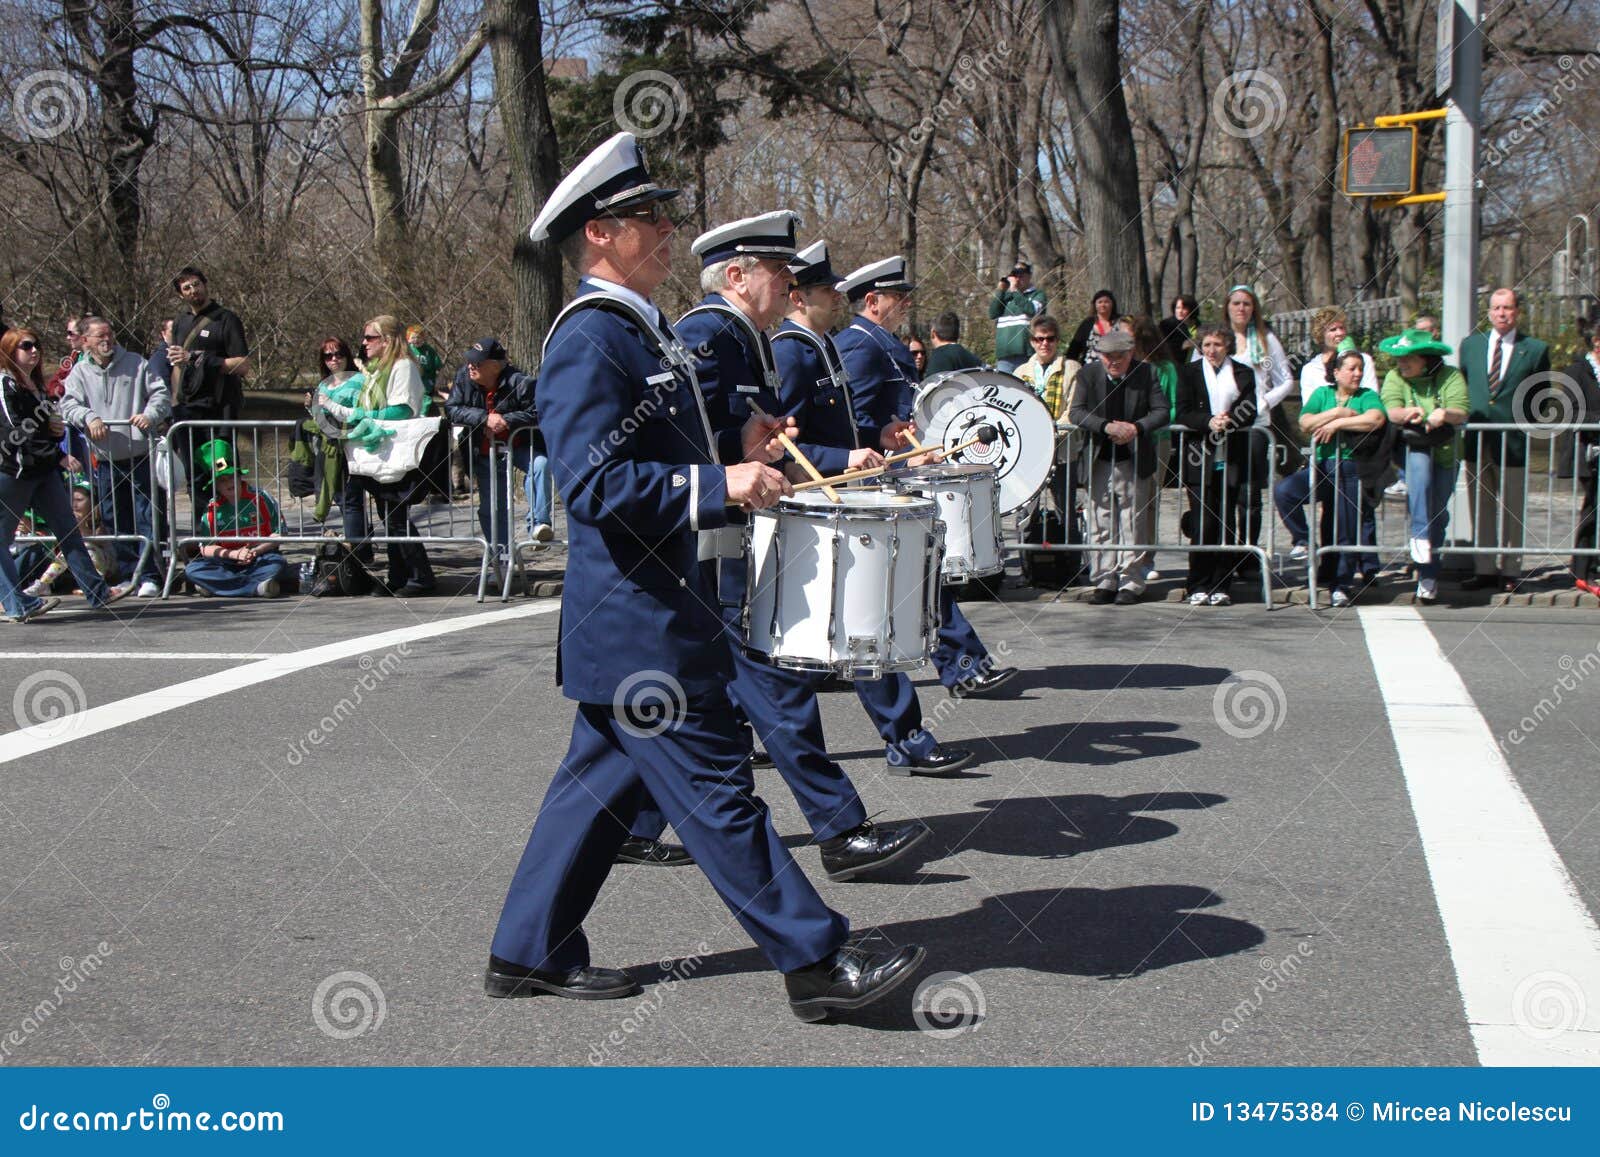 Marching Band Music Wallpaper 85 images